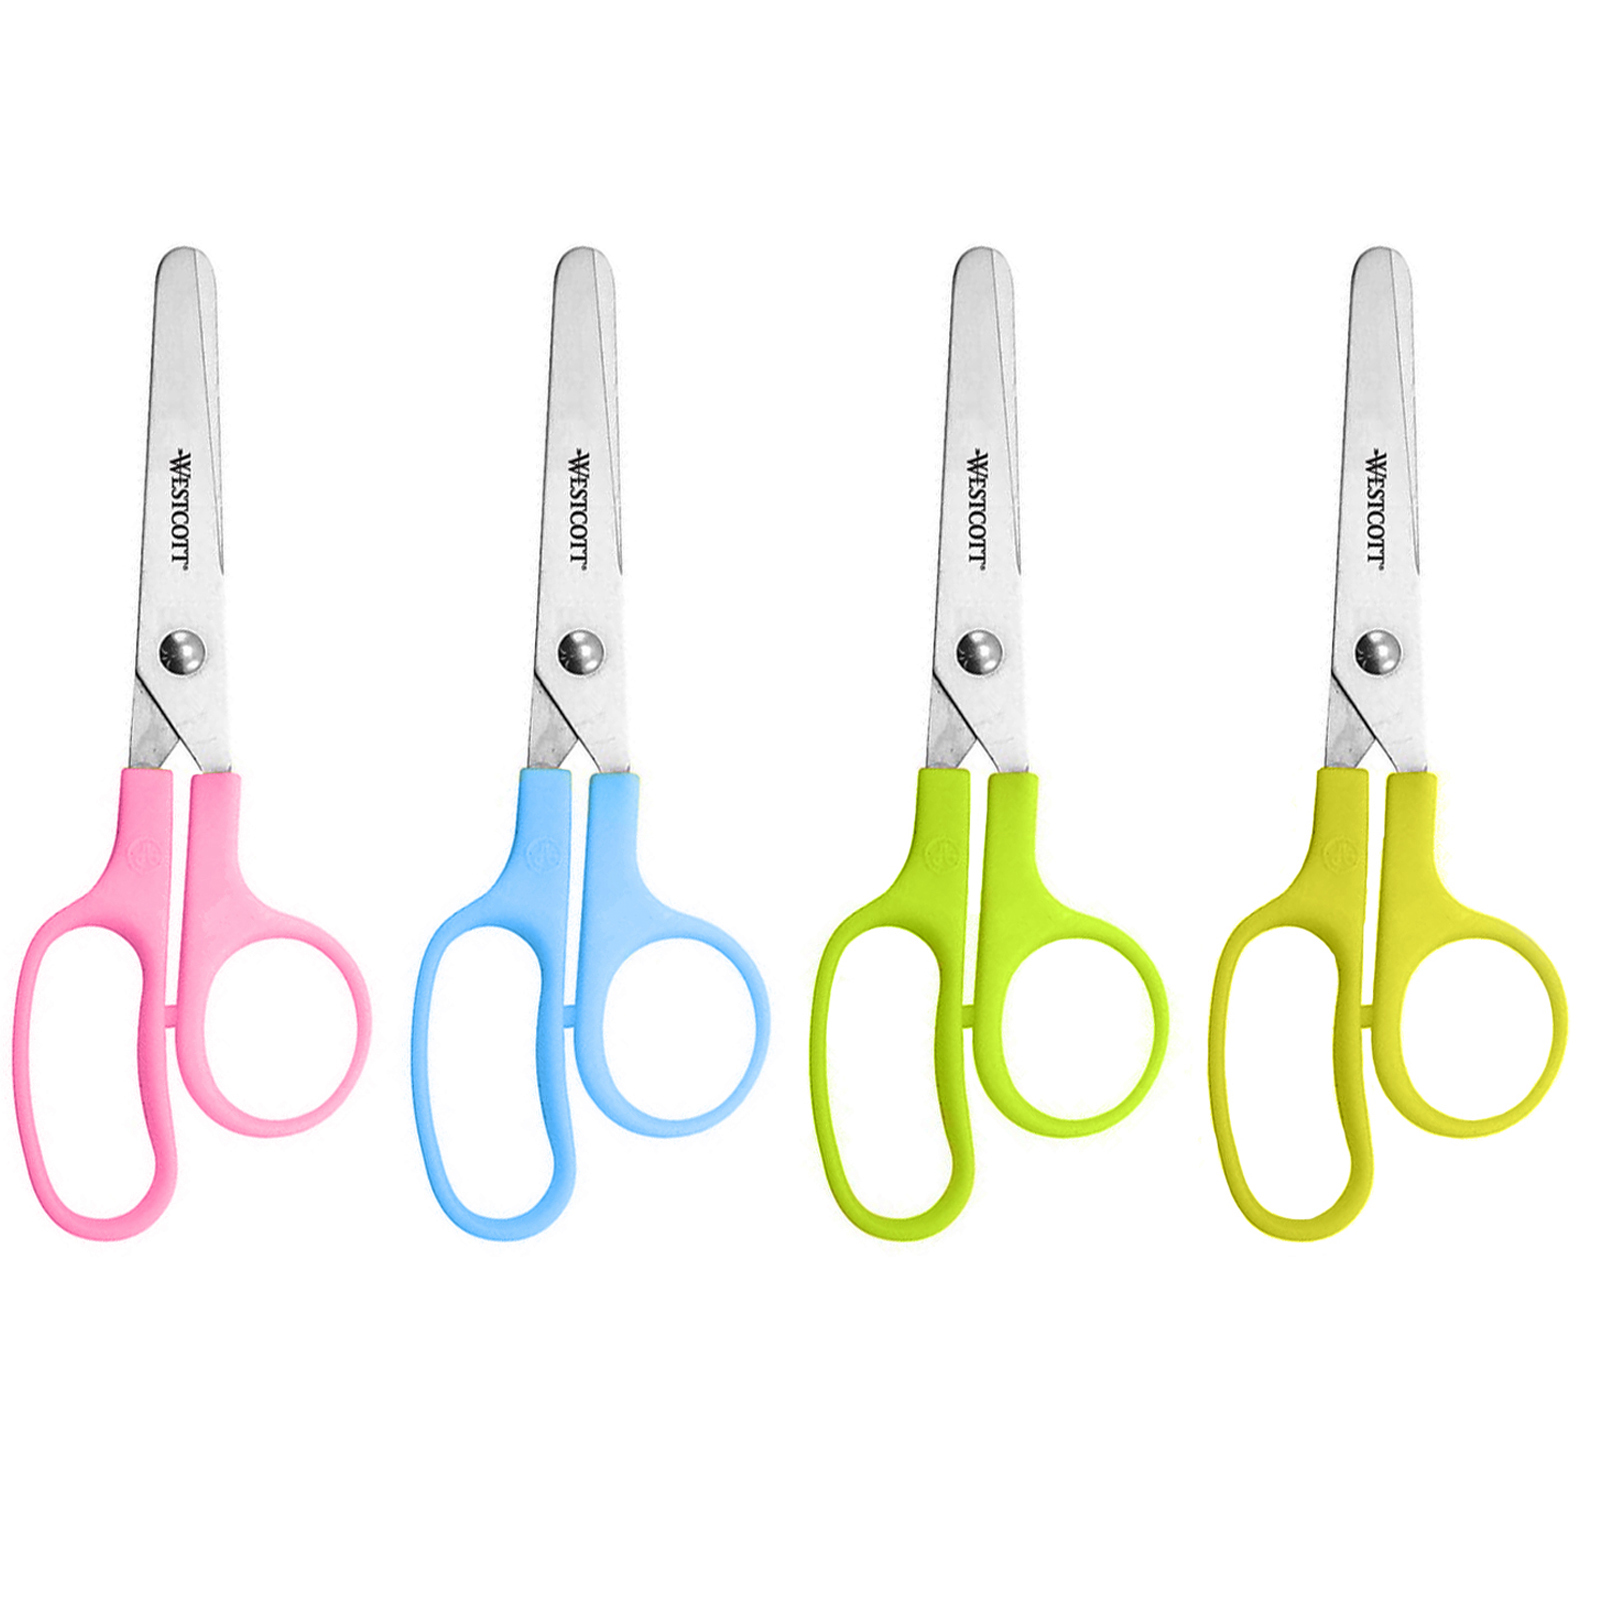 The Teachers' Lounge®  School Left-Handed Kids Scissors, Assorted Colors,  5 Pointed